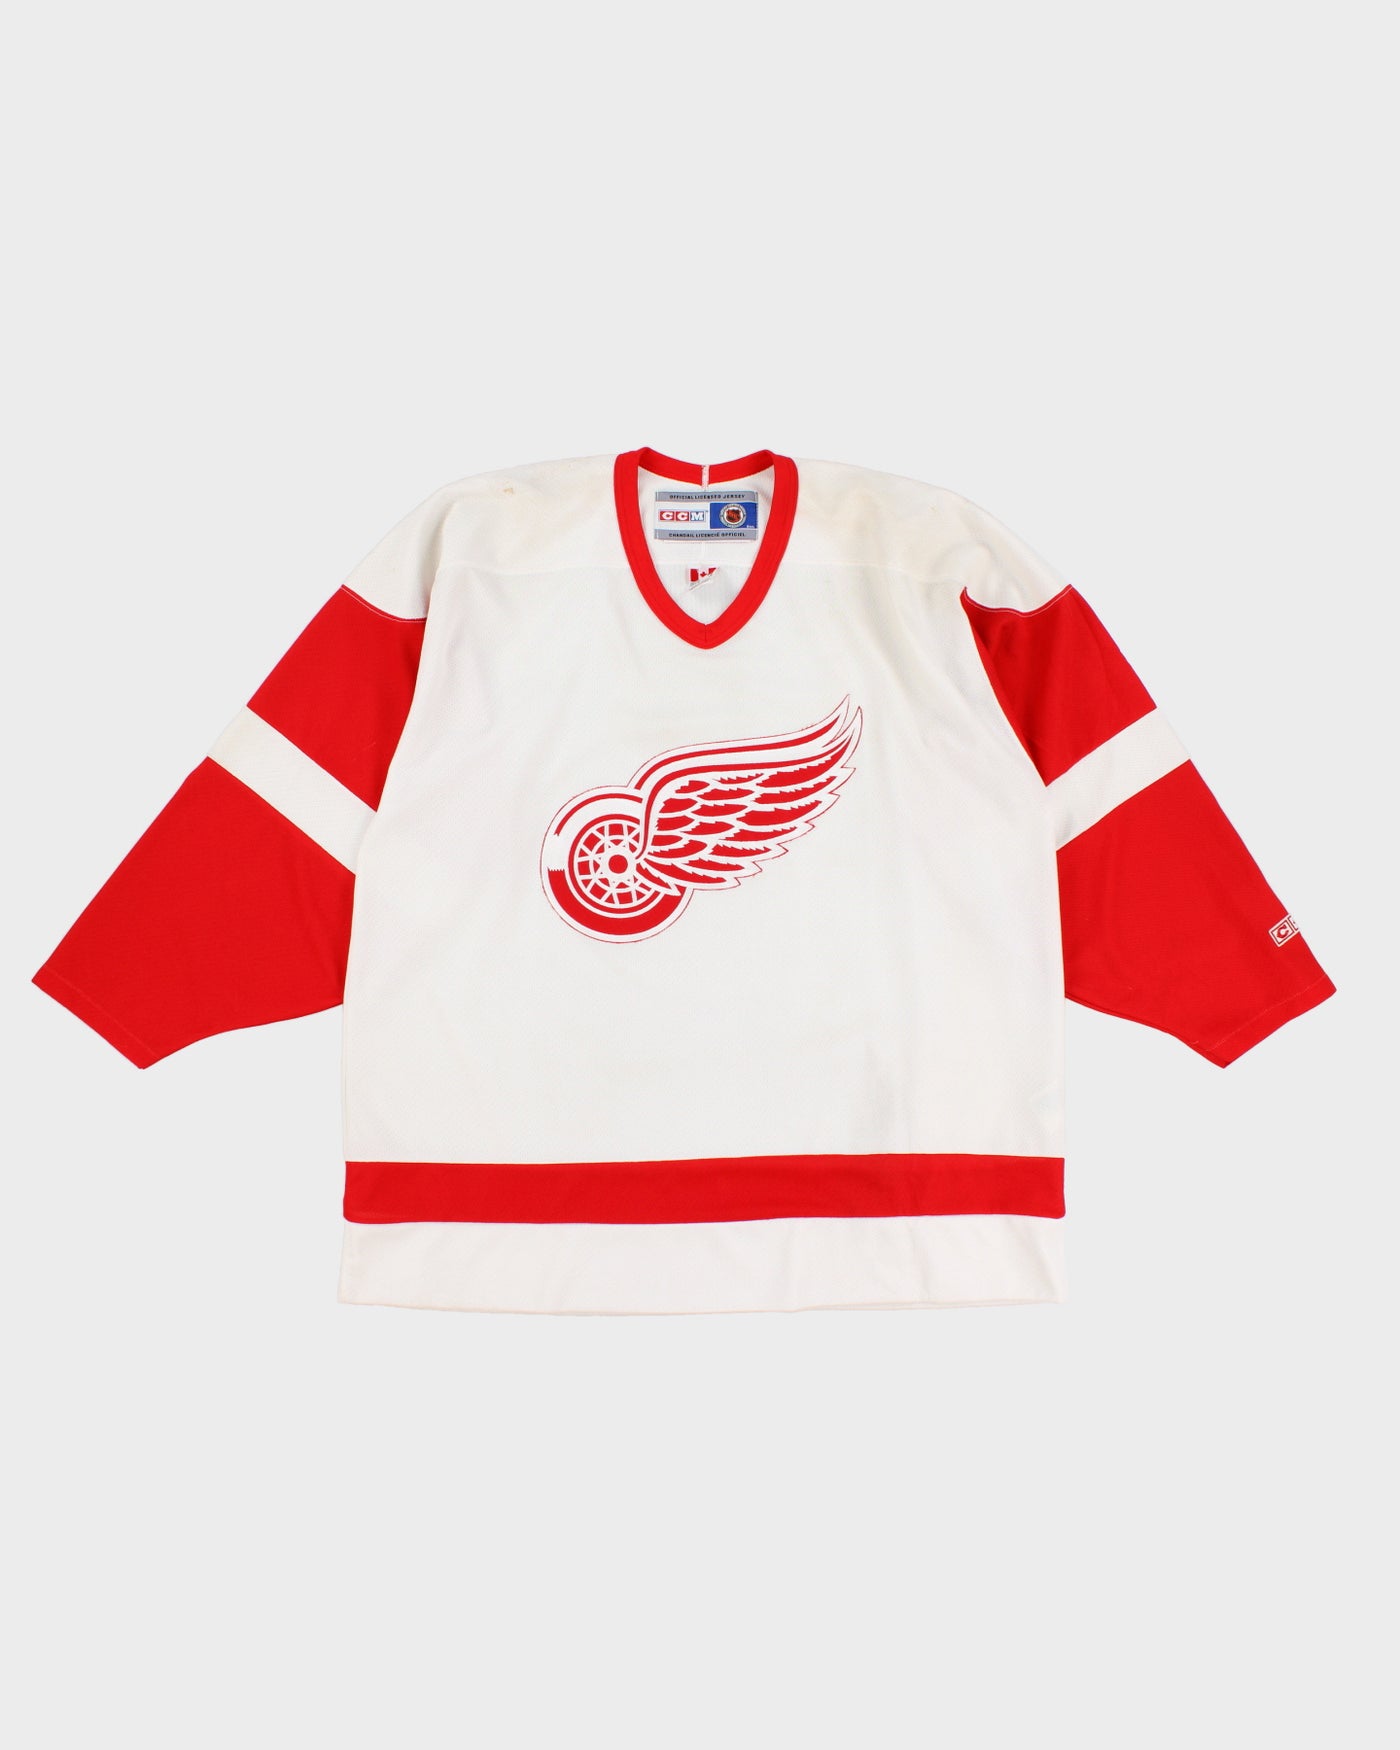 Vintage 90s NHL x Detroit Red Wings Hockey Jersey - XL